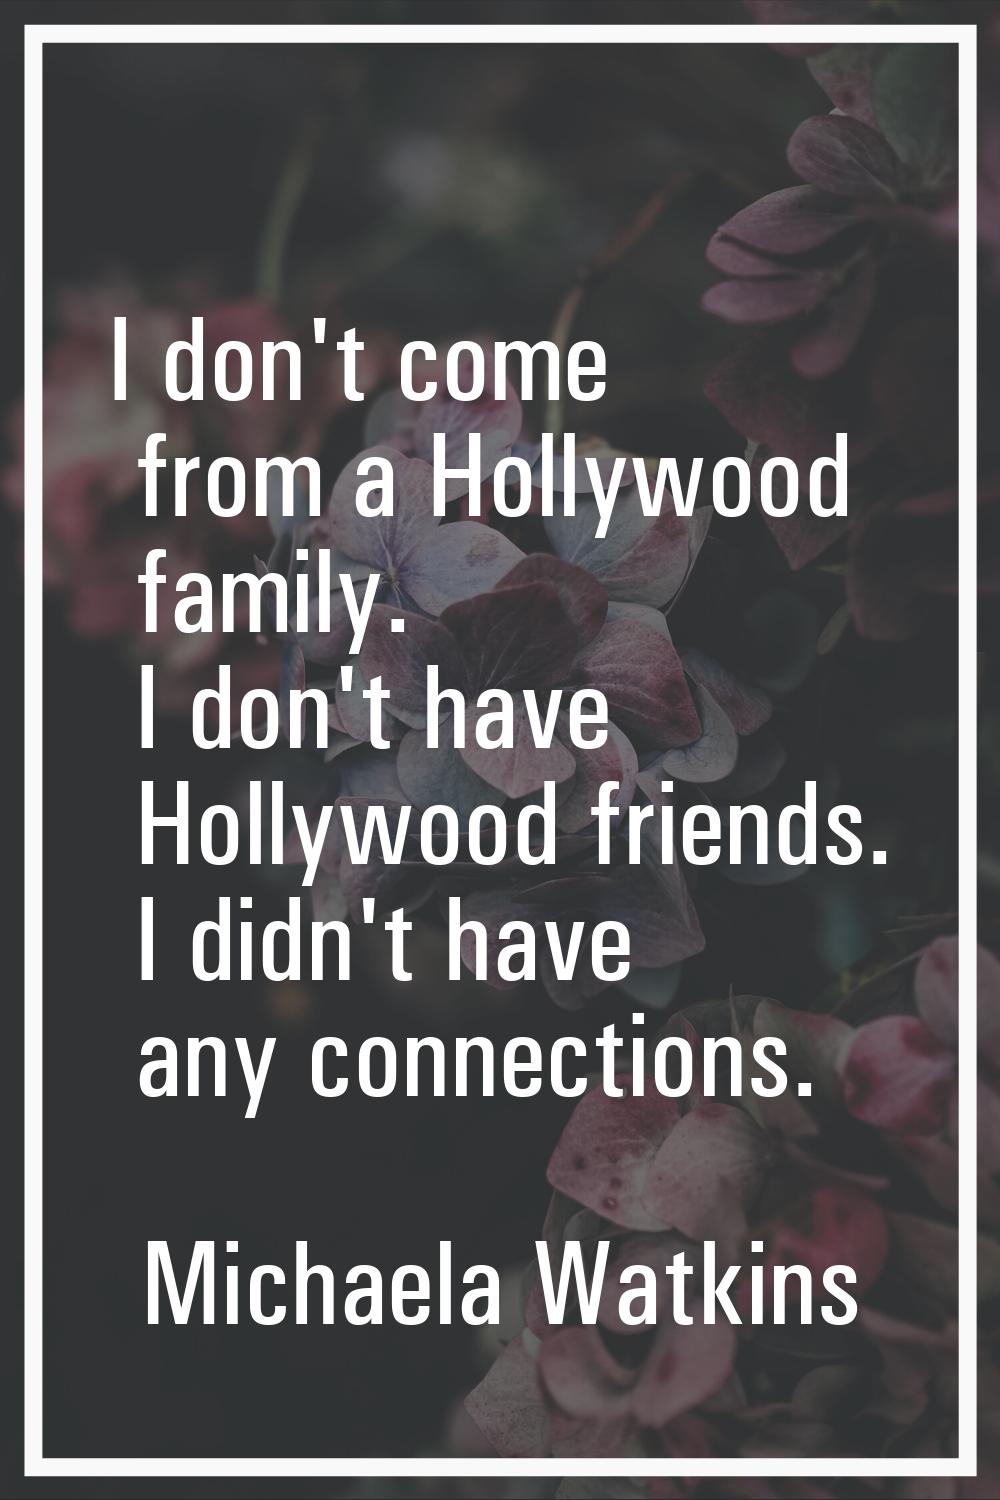 I don't come from a Hollywood family. I don't have Hollywood friends. I didn't have any connections